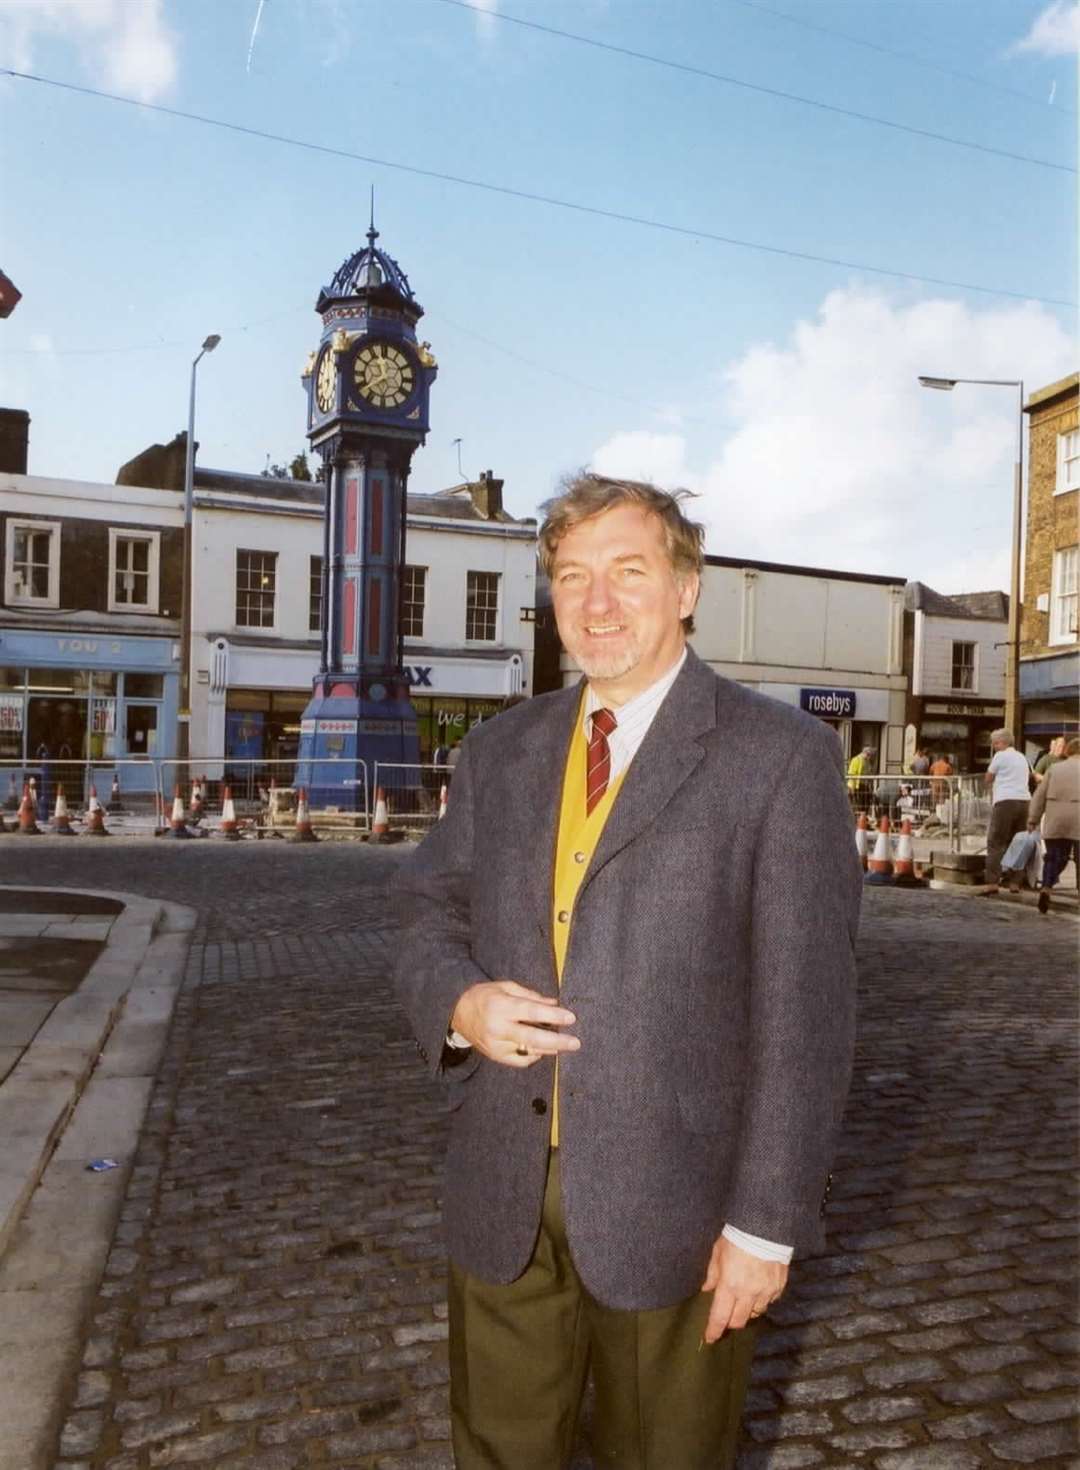 Former Sheerness town centre manager Alan Ogilvie in front of the clock tower